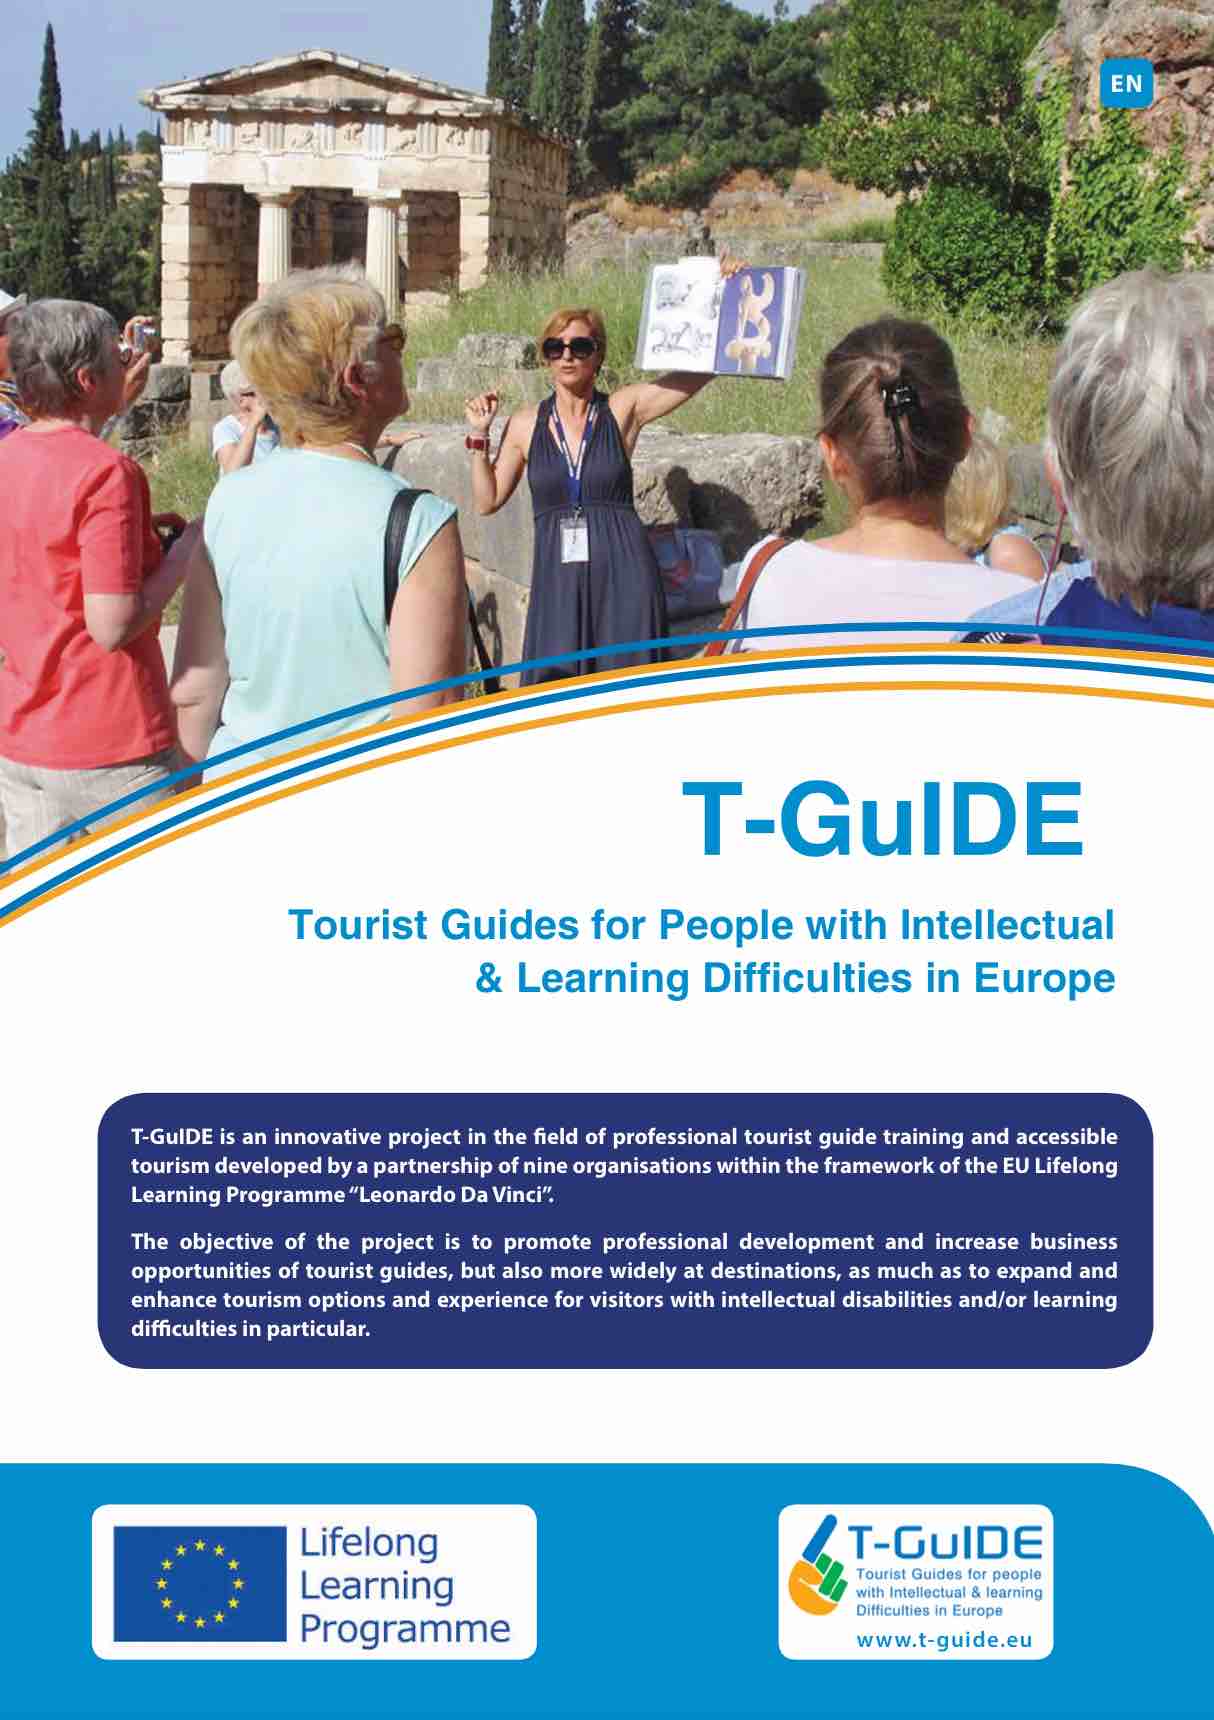 Image of T-Guide brochure